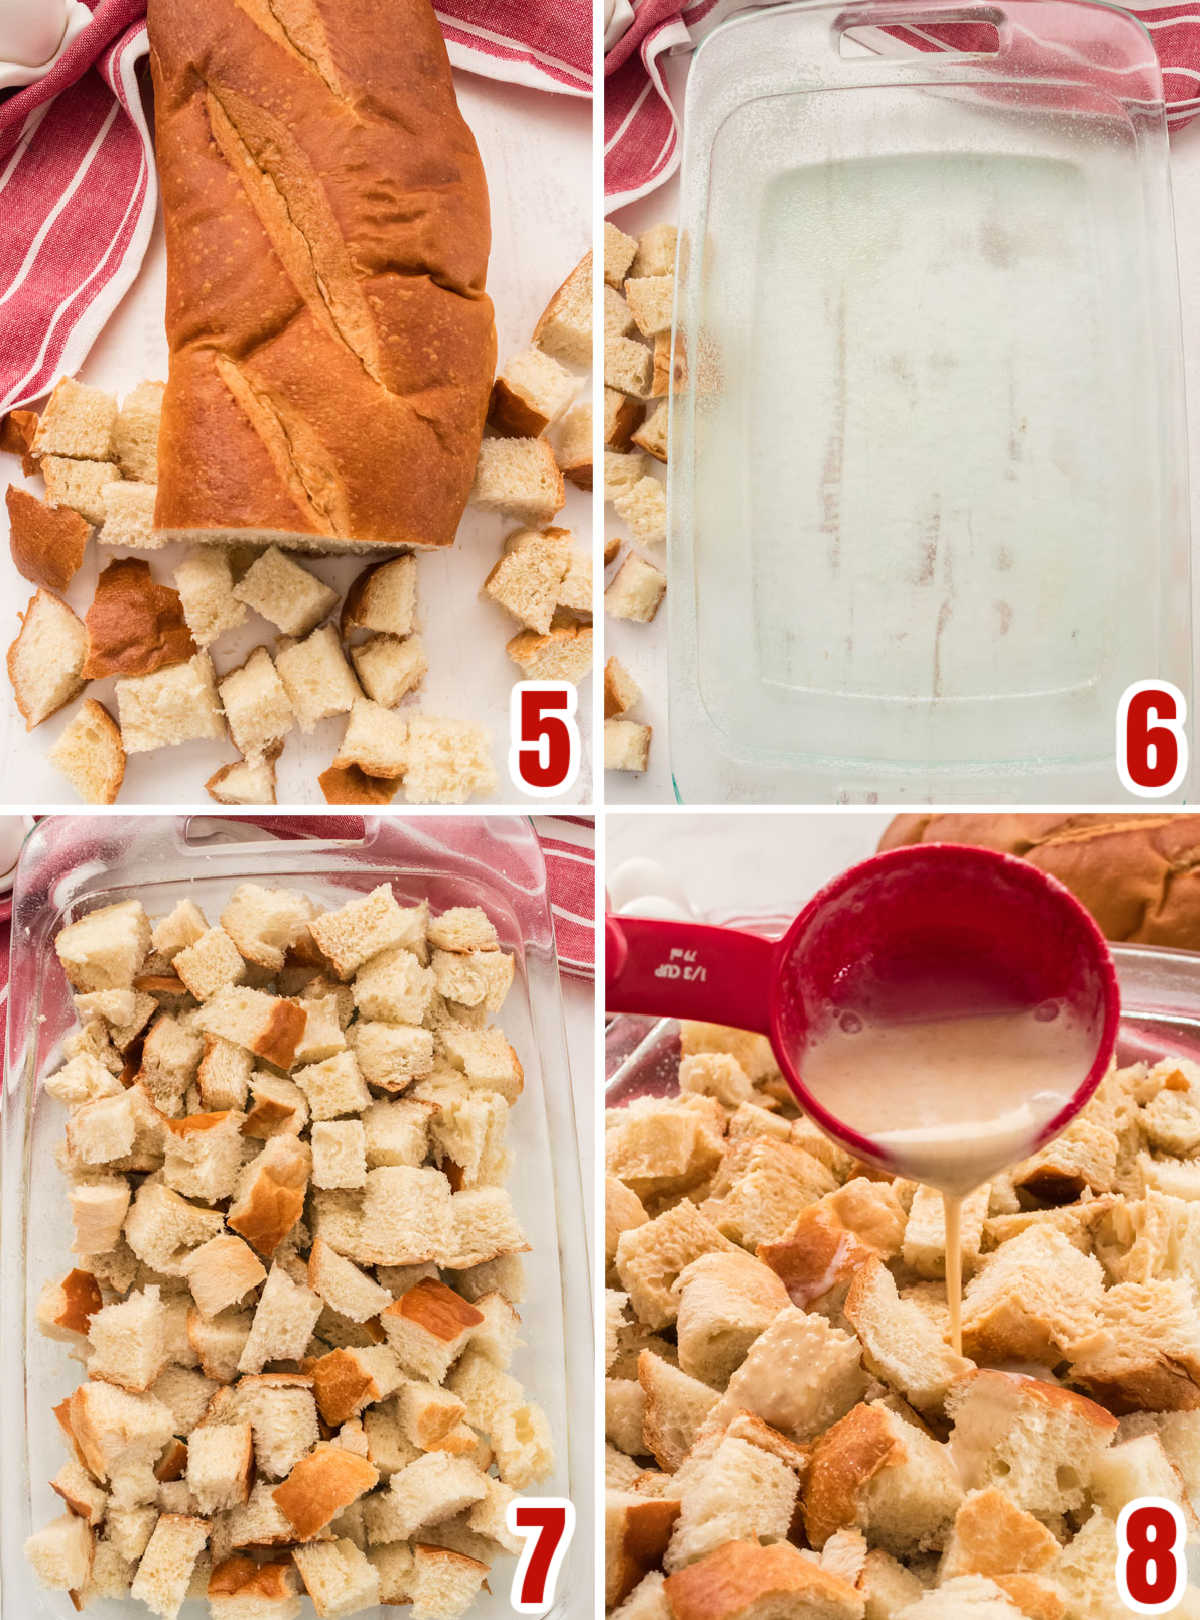 Collage image showing how to assemble the Bread Pudding for baking.